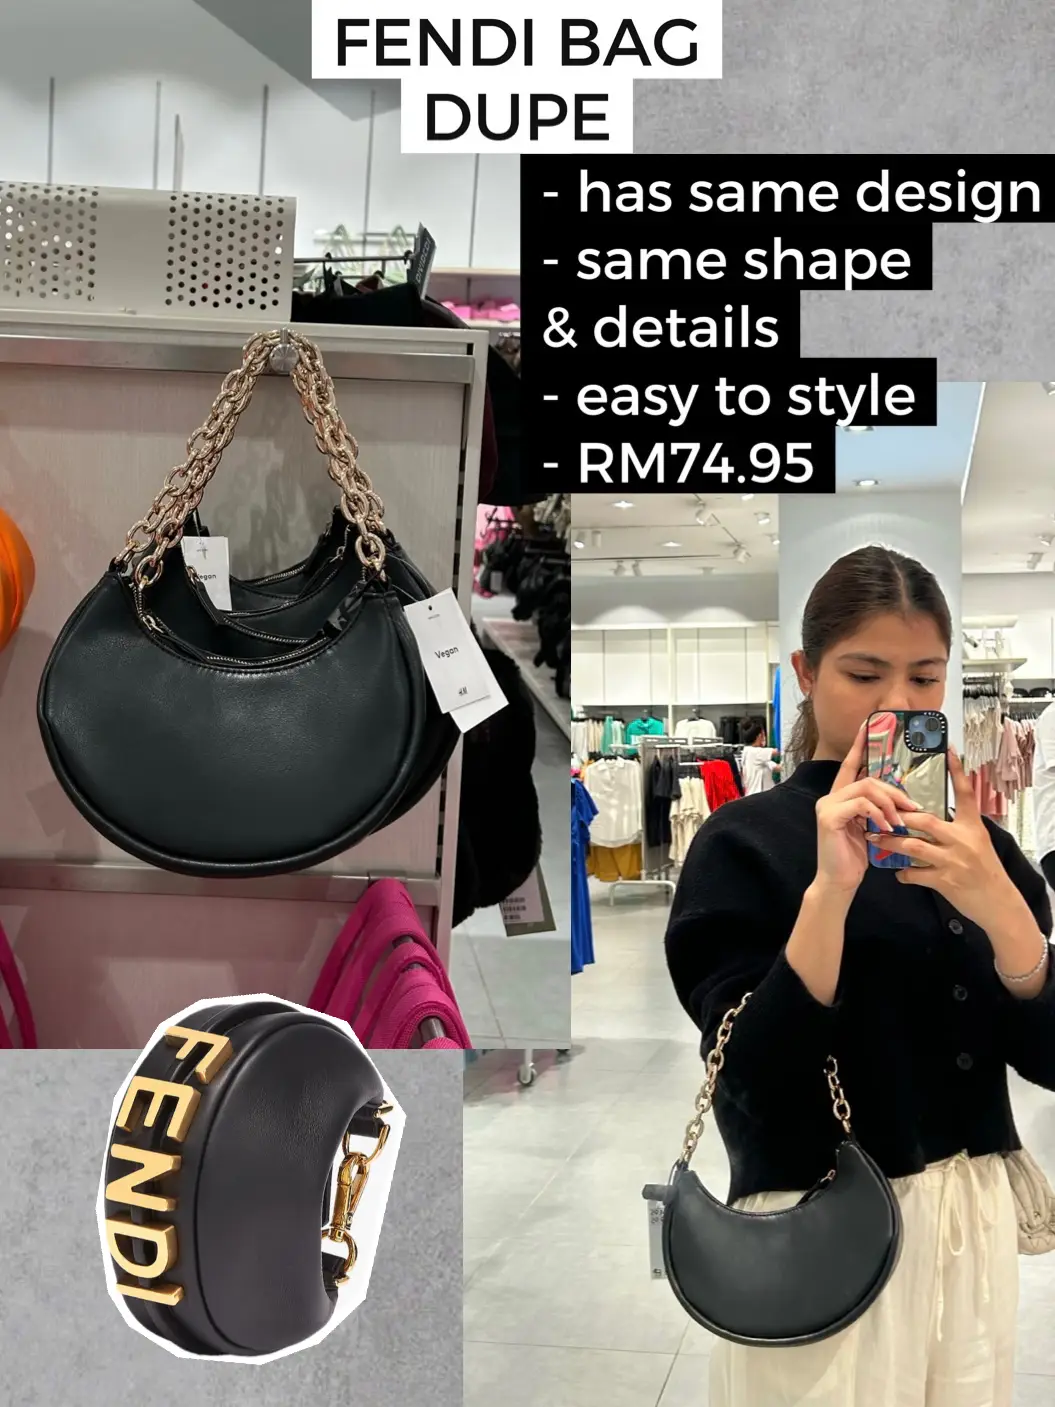 Designer Bag Dupes With a Similar Style as High-End Brands